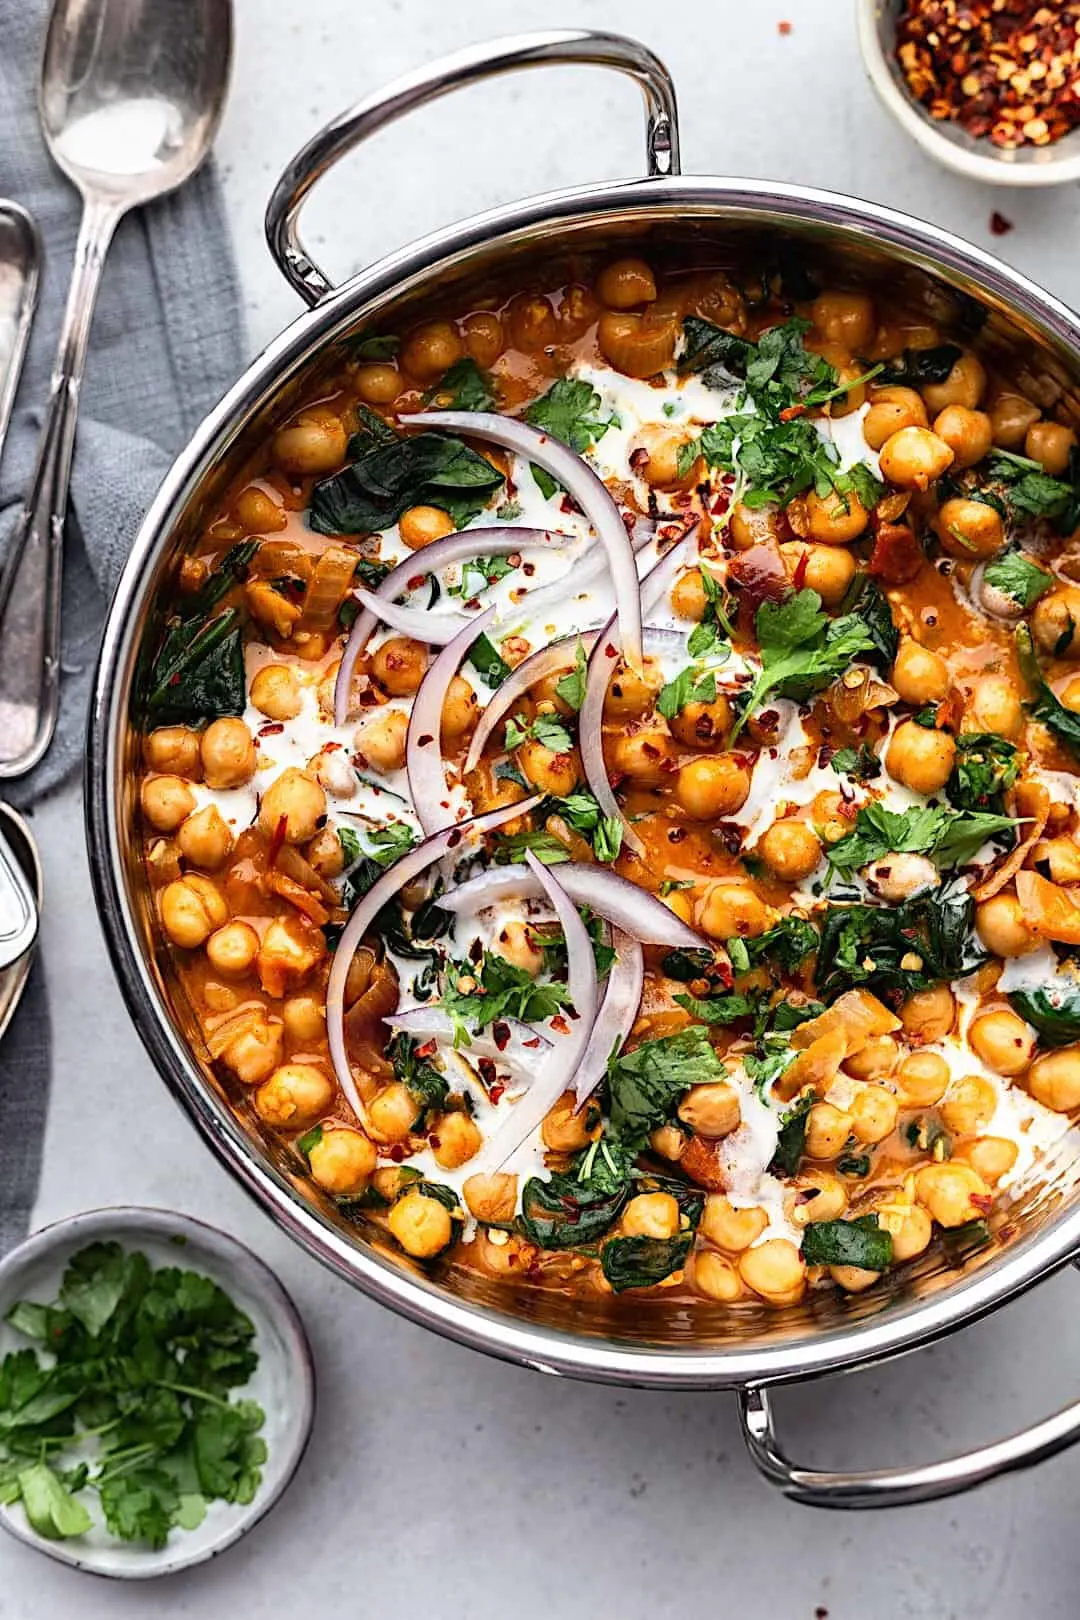 Chickpea and Spinach Curry #vegan #recipe #curry #chickpea #spinach #easy #healthy